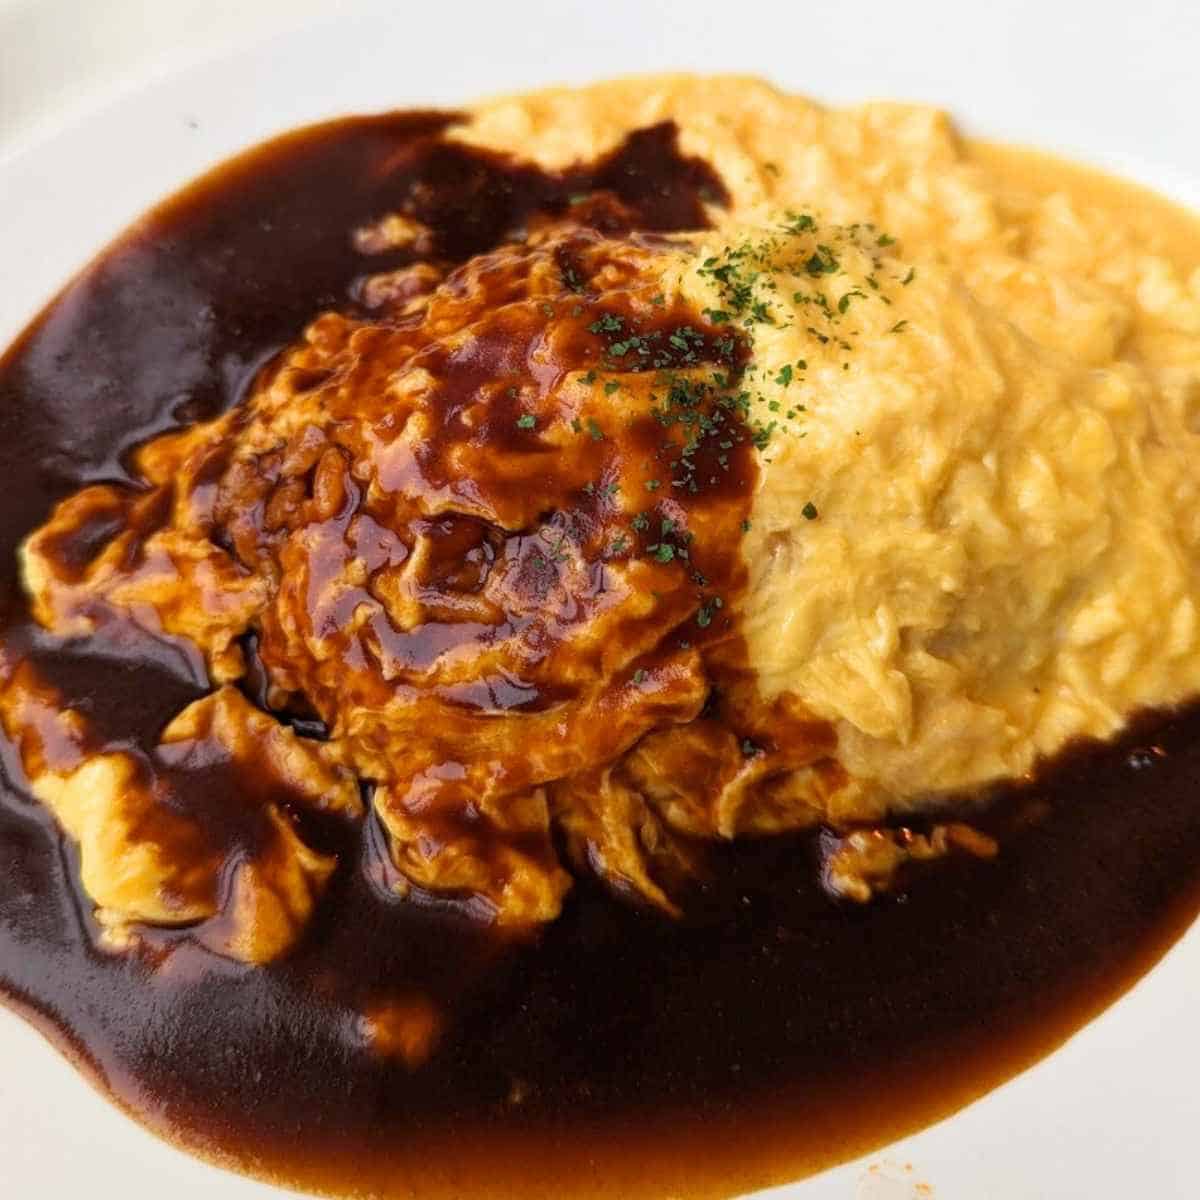 Japanese omelette rice recipe with demi glace sauce